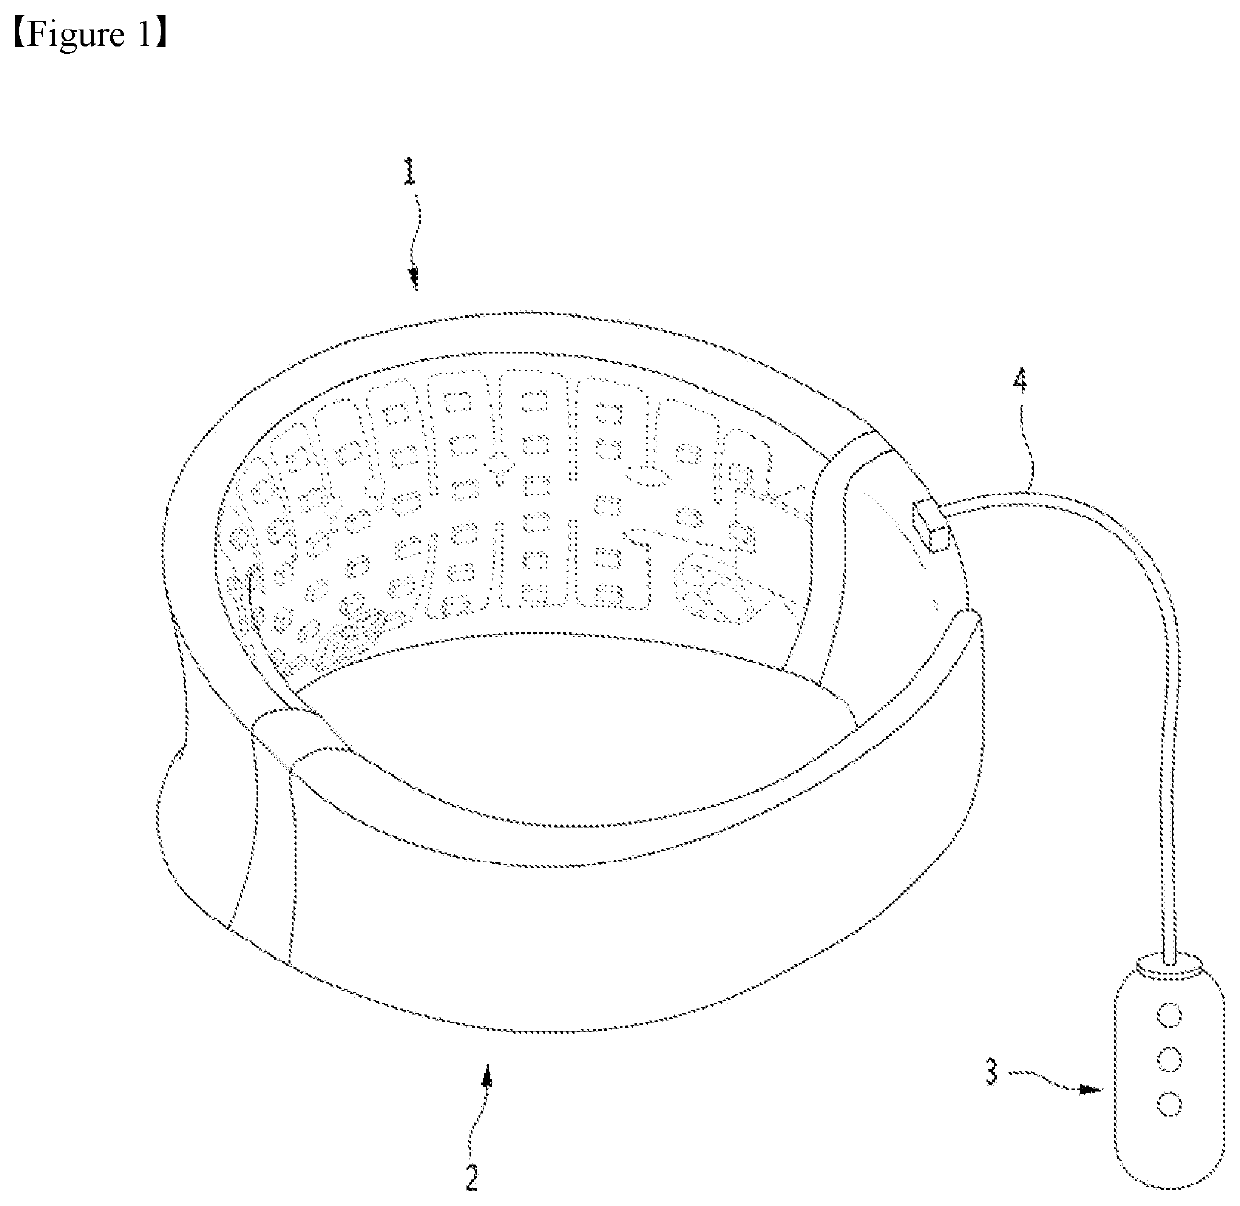 Light outputting device for skin care